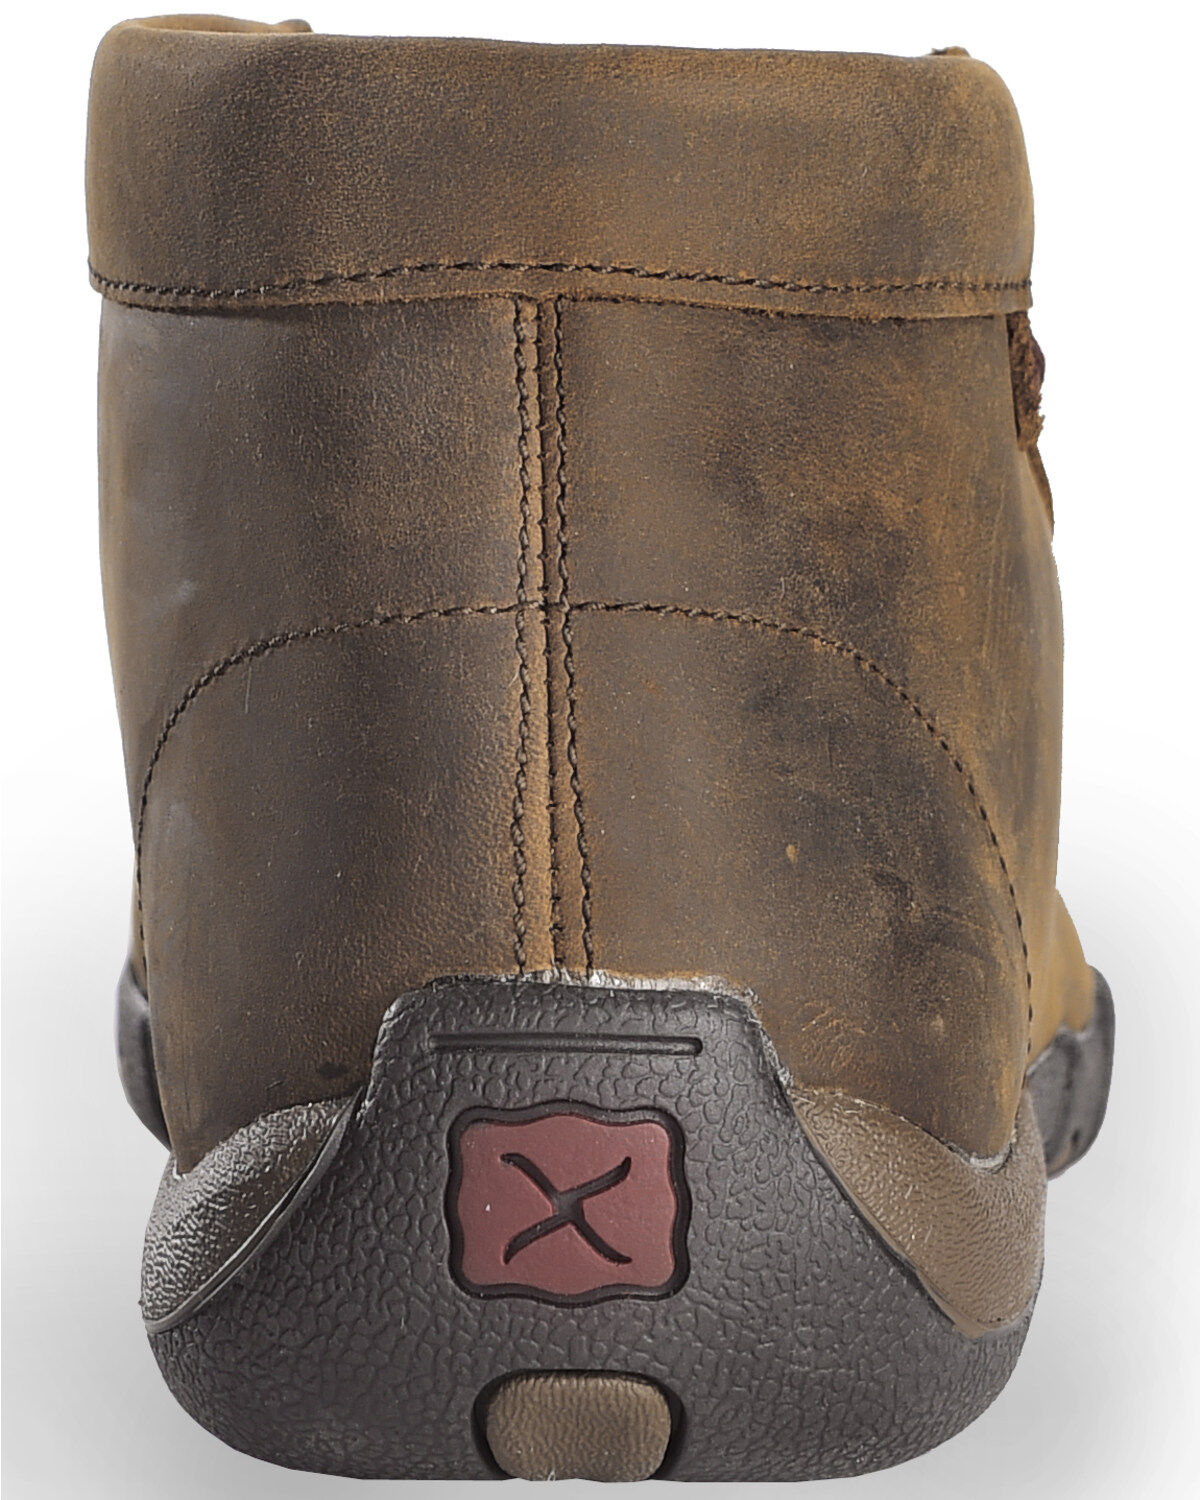 women's twisted x work boots